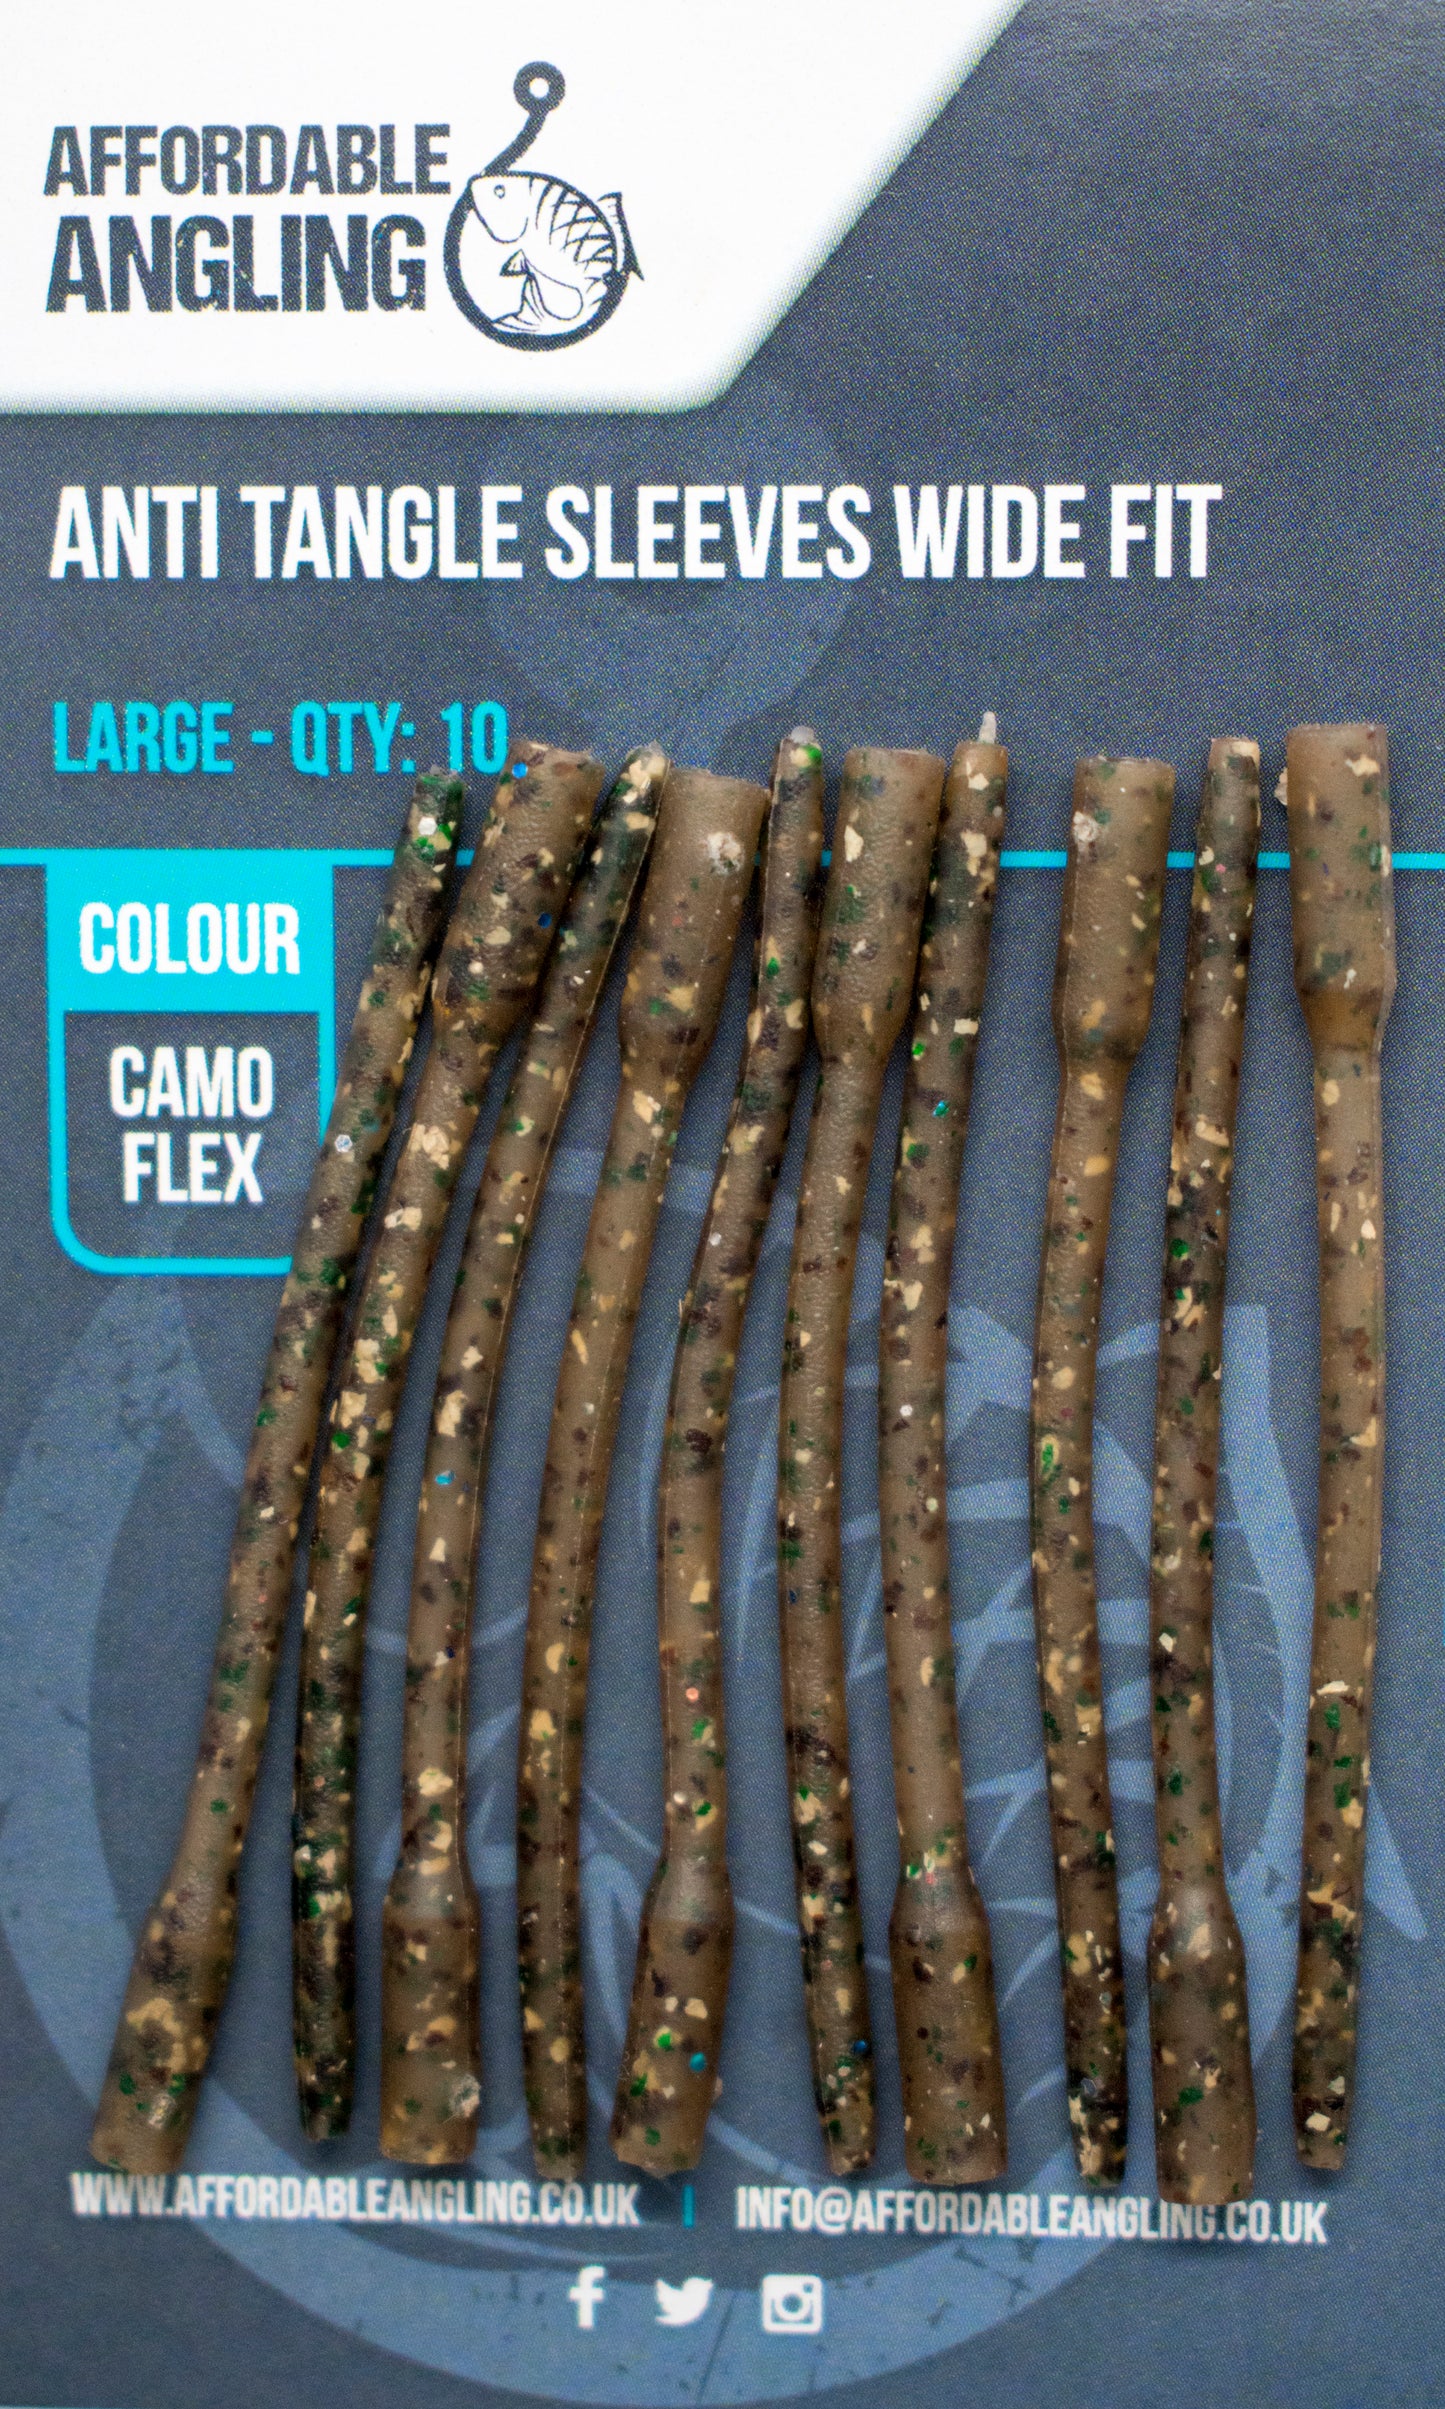 Anti Tangle Sleeves Camo Flex - Wide Fit Large